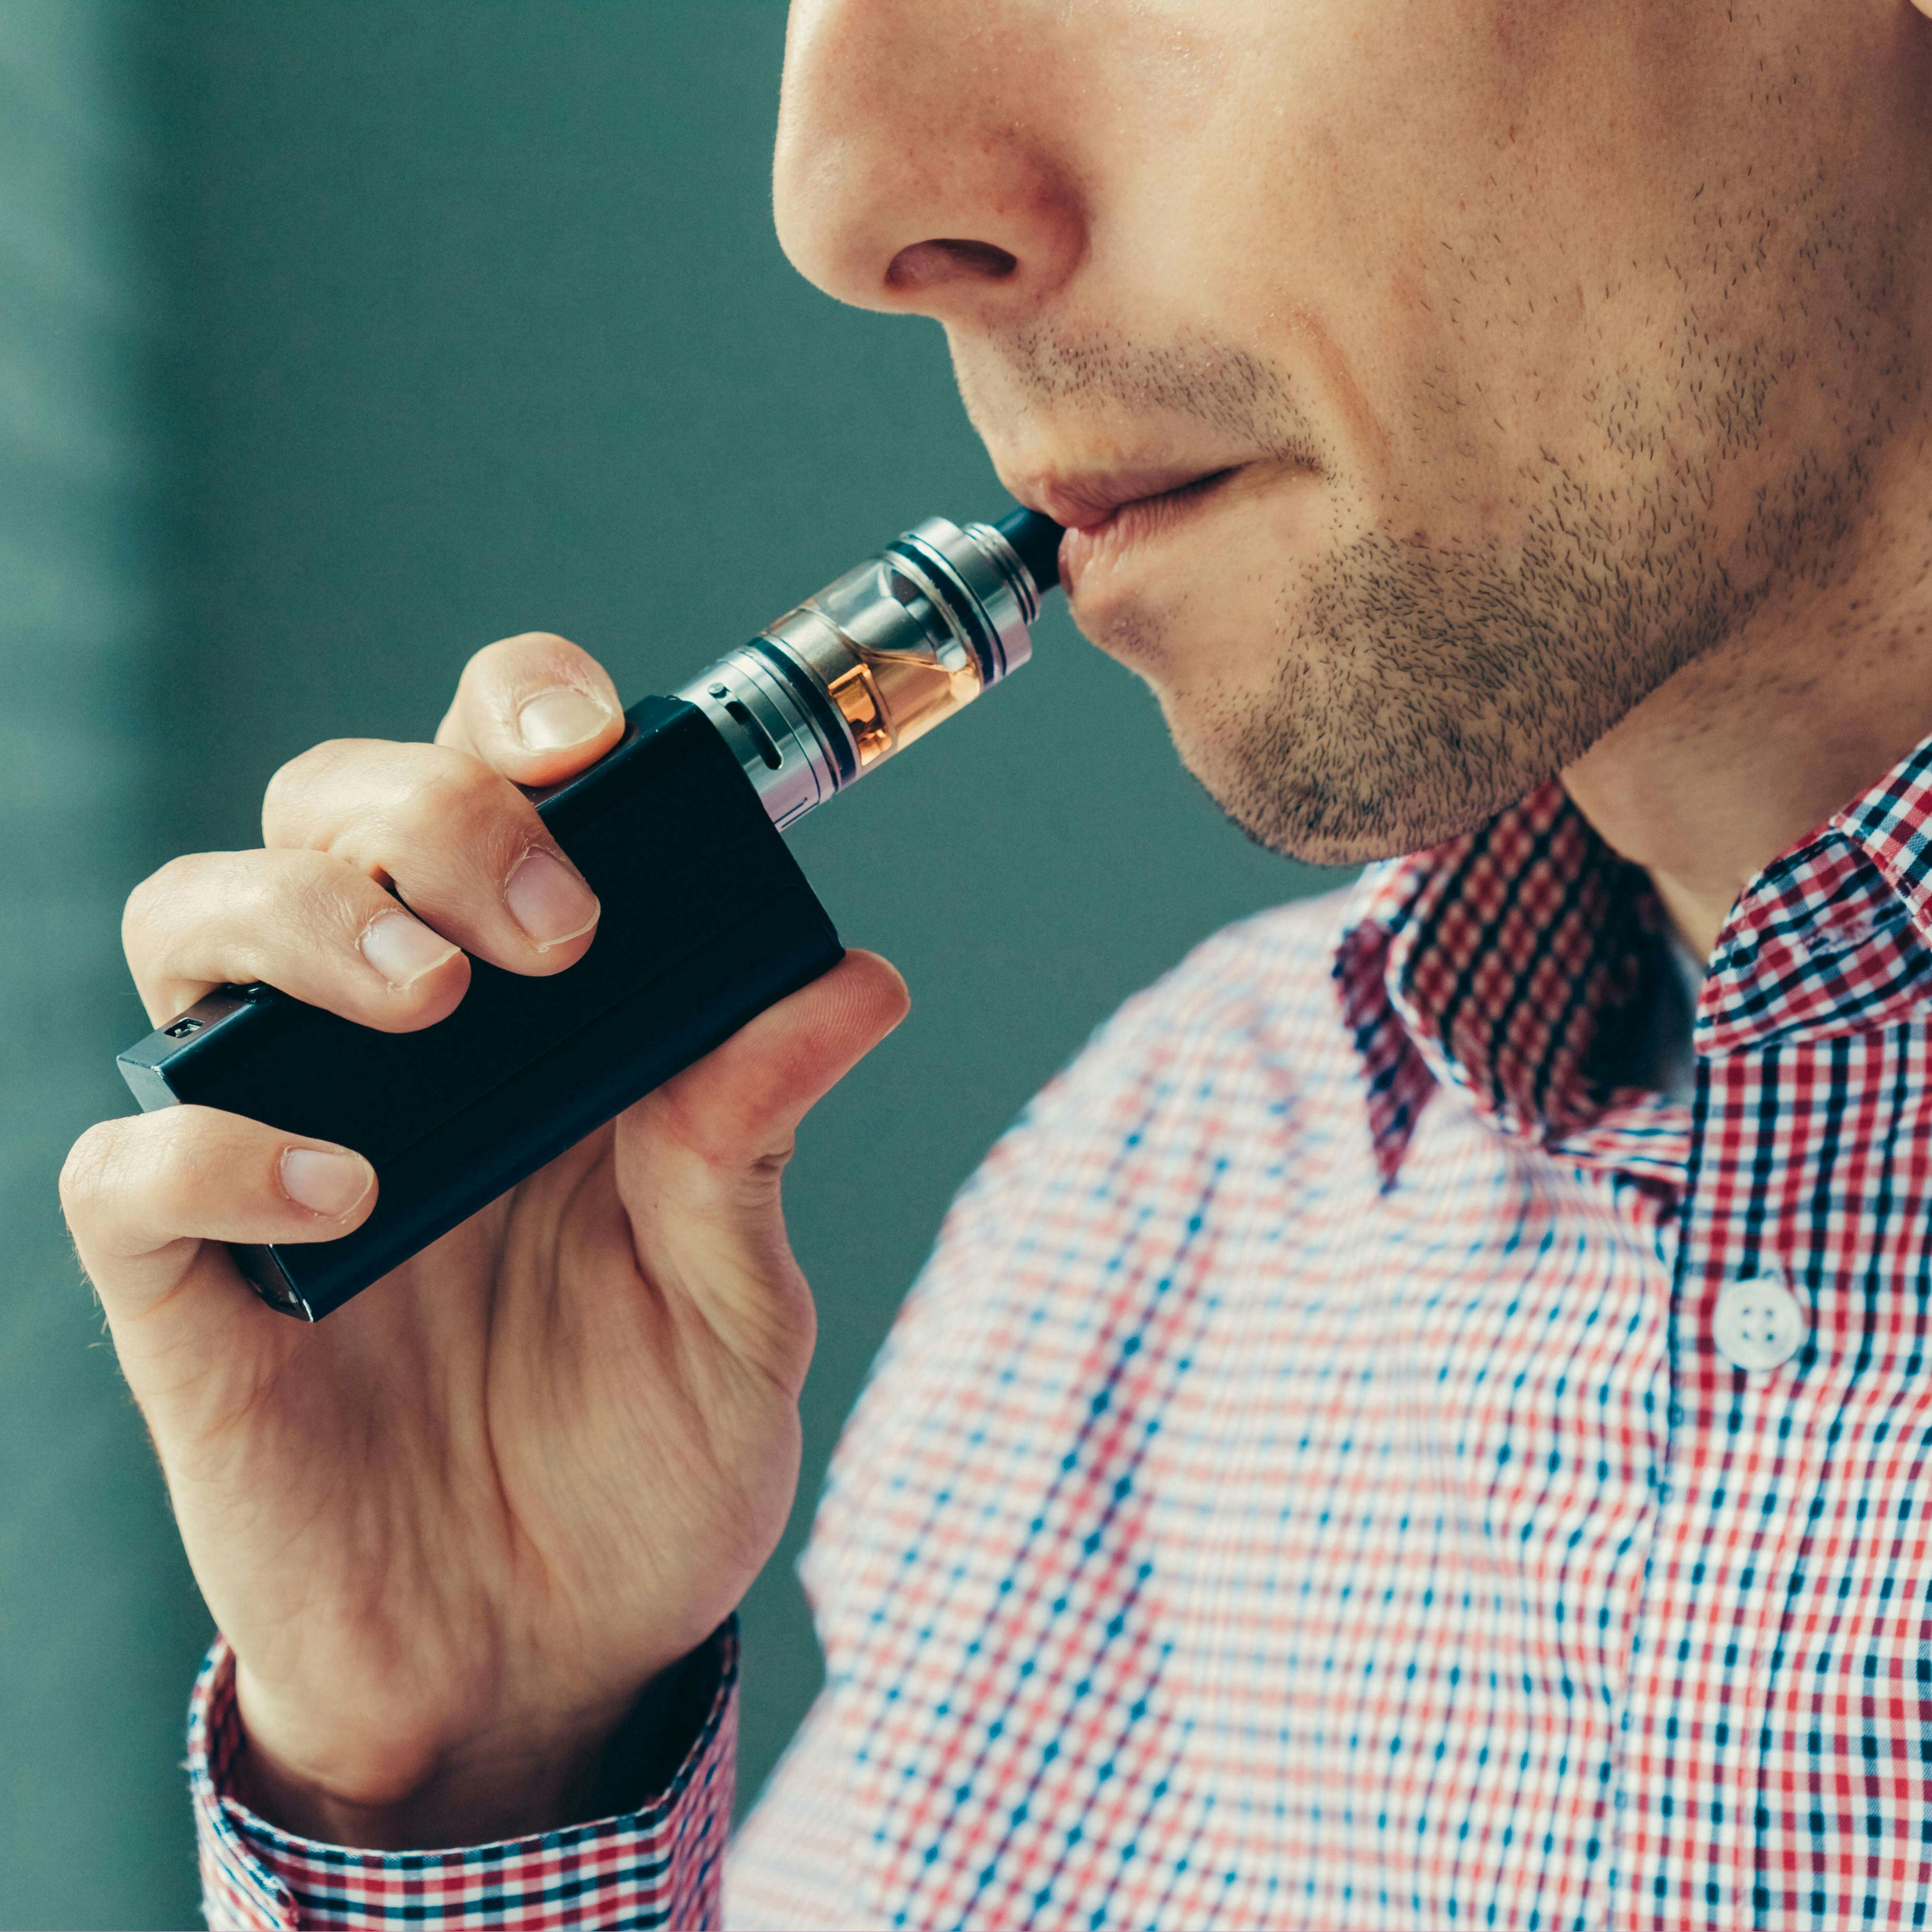 Upcoming Trials Seek to Determine Cancer-Related Health Effects of E-Cigarettes